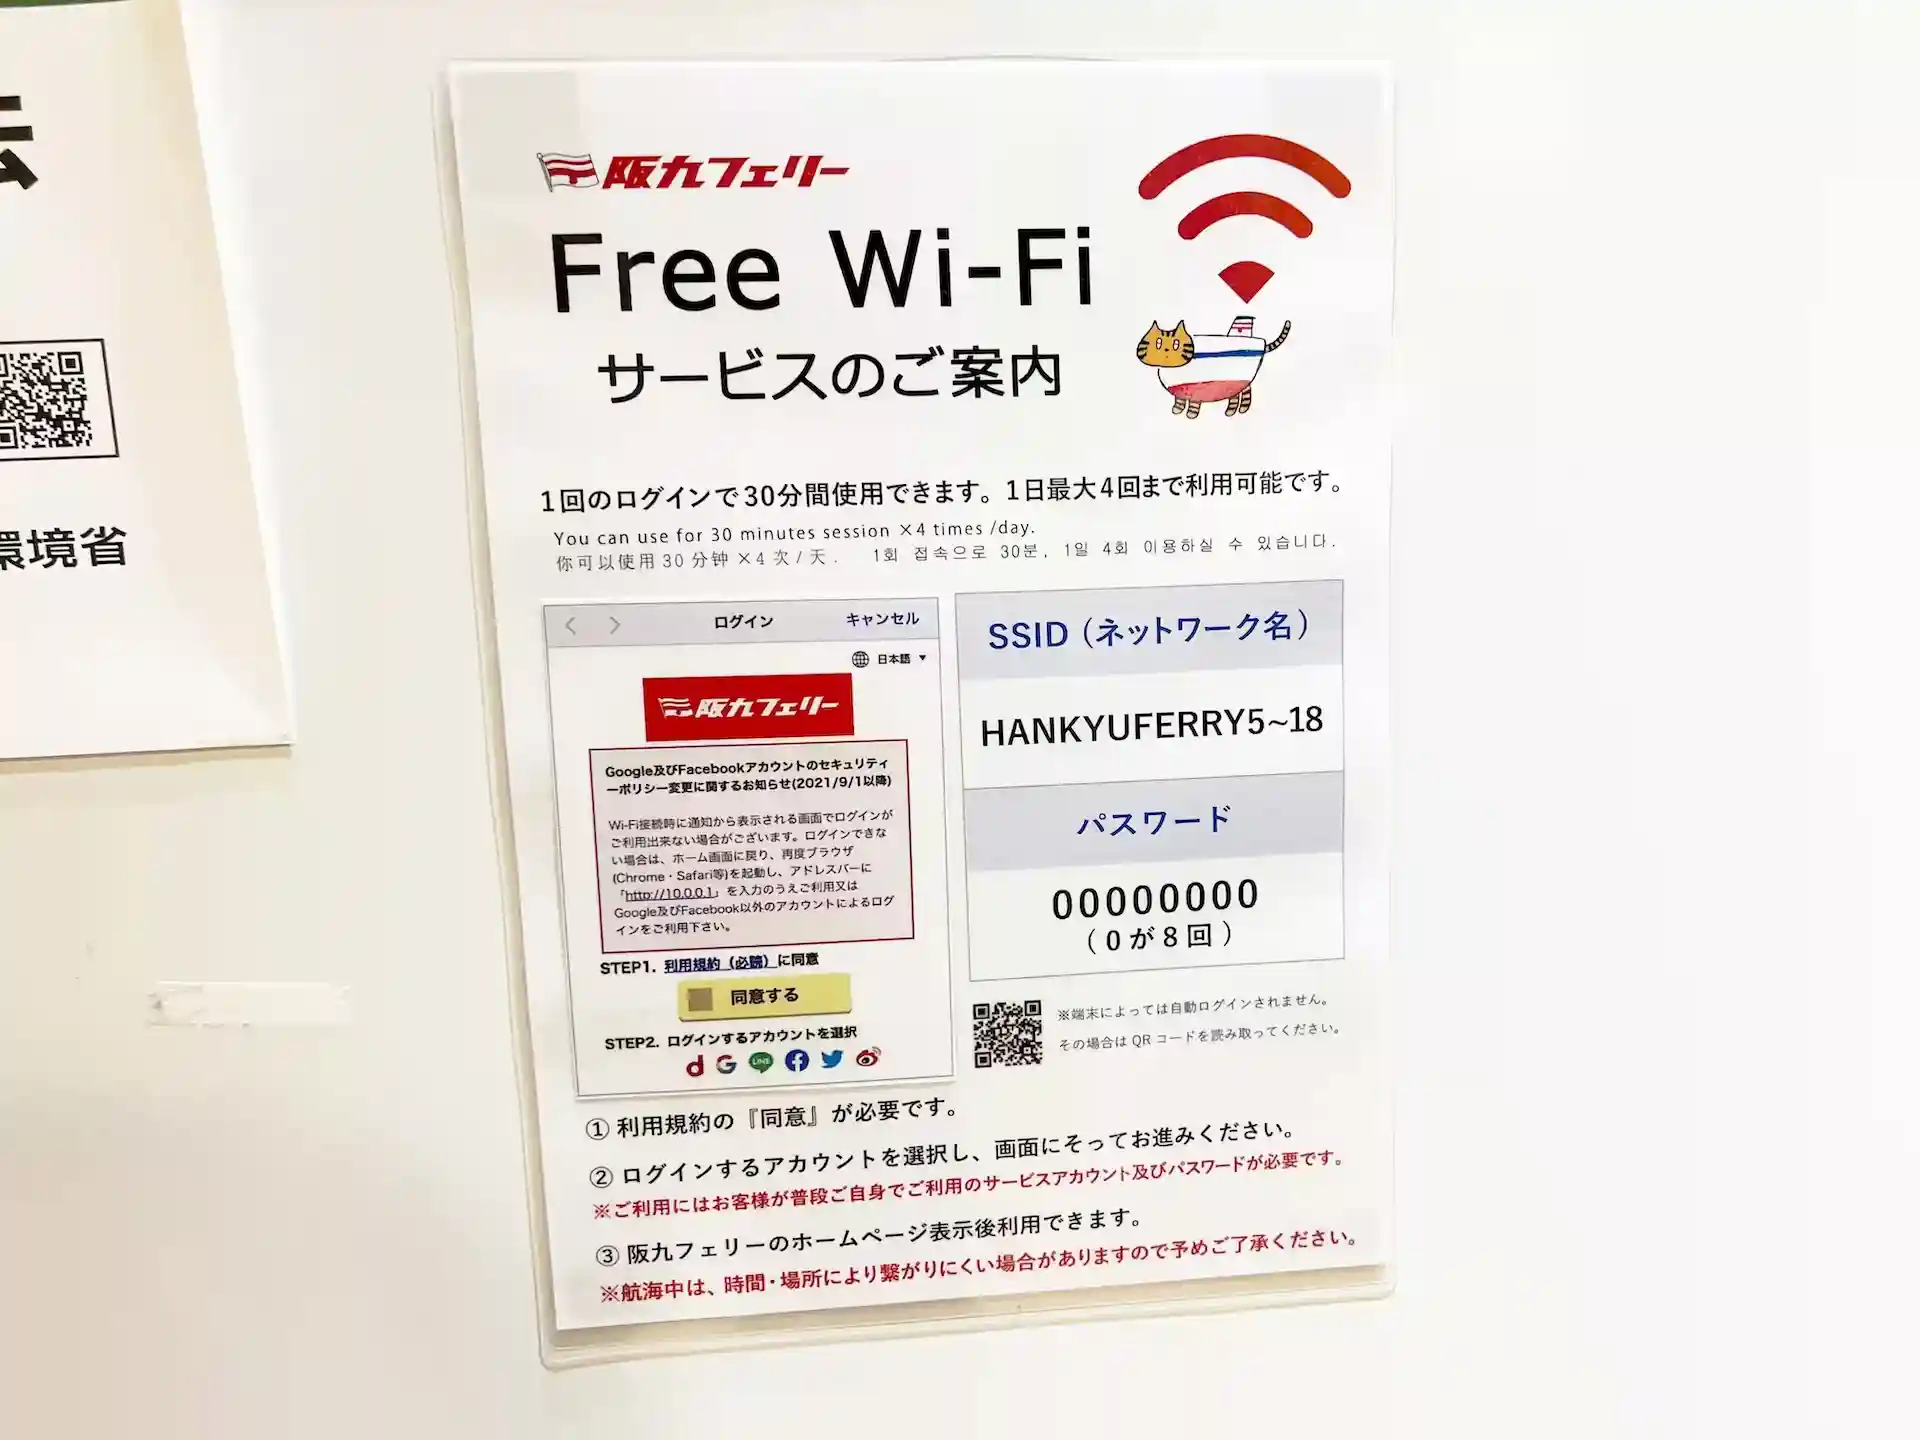 Hankyu Ferry Settsu Paper with instructions for operating the free Wi-Fi on board